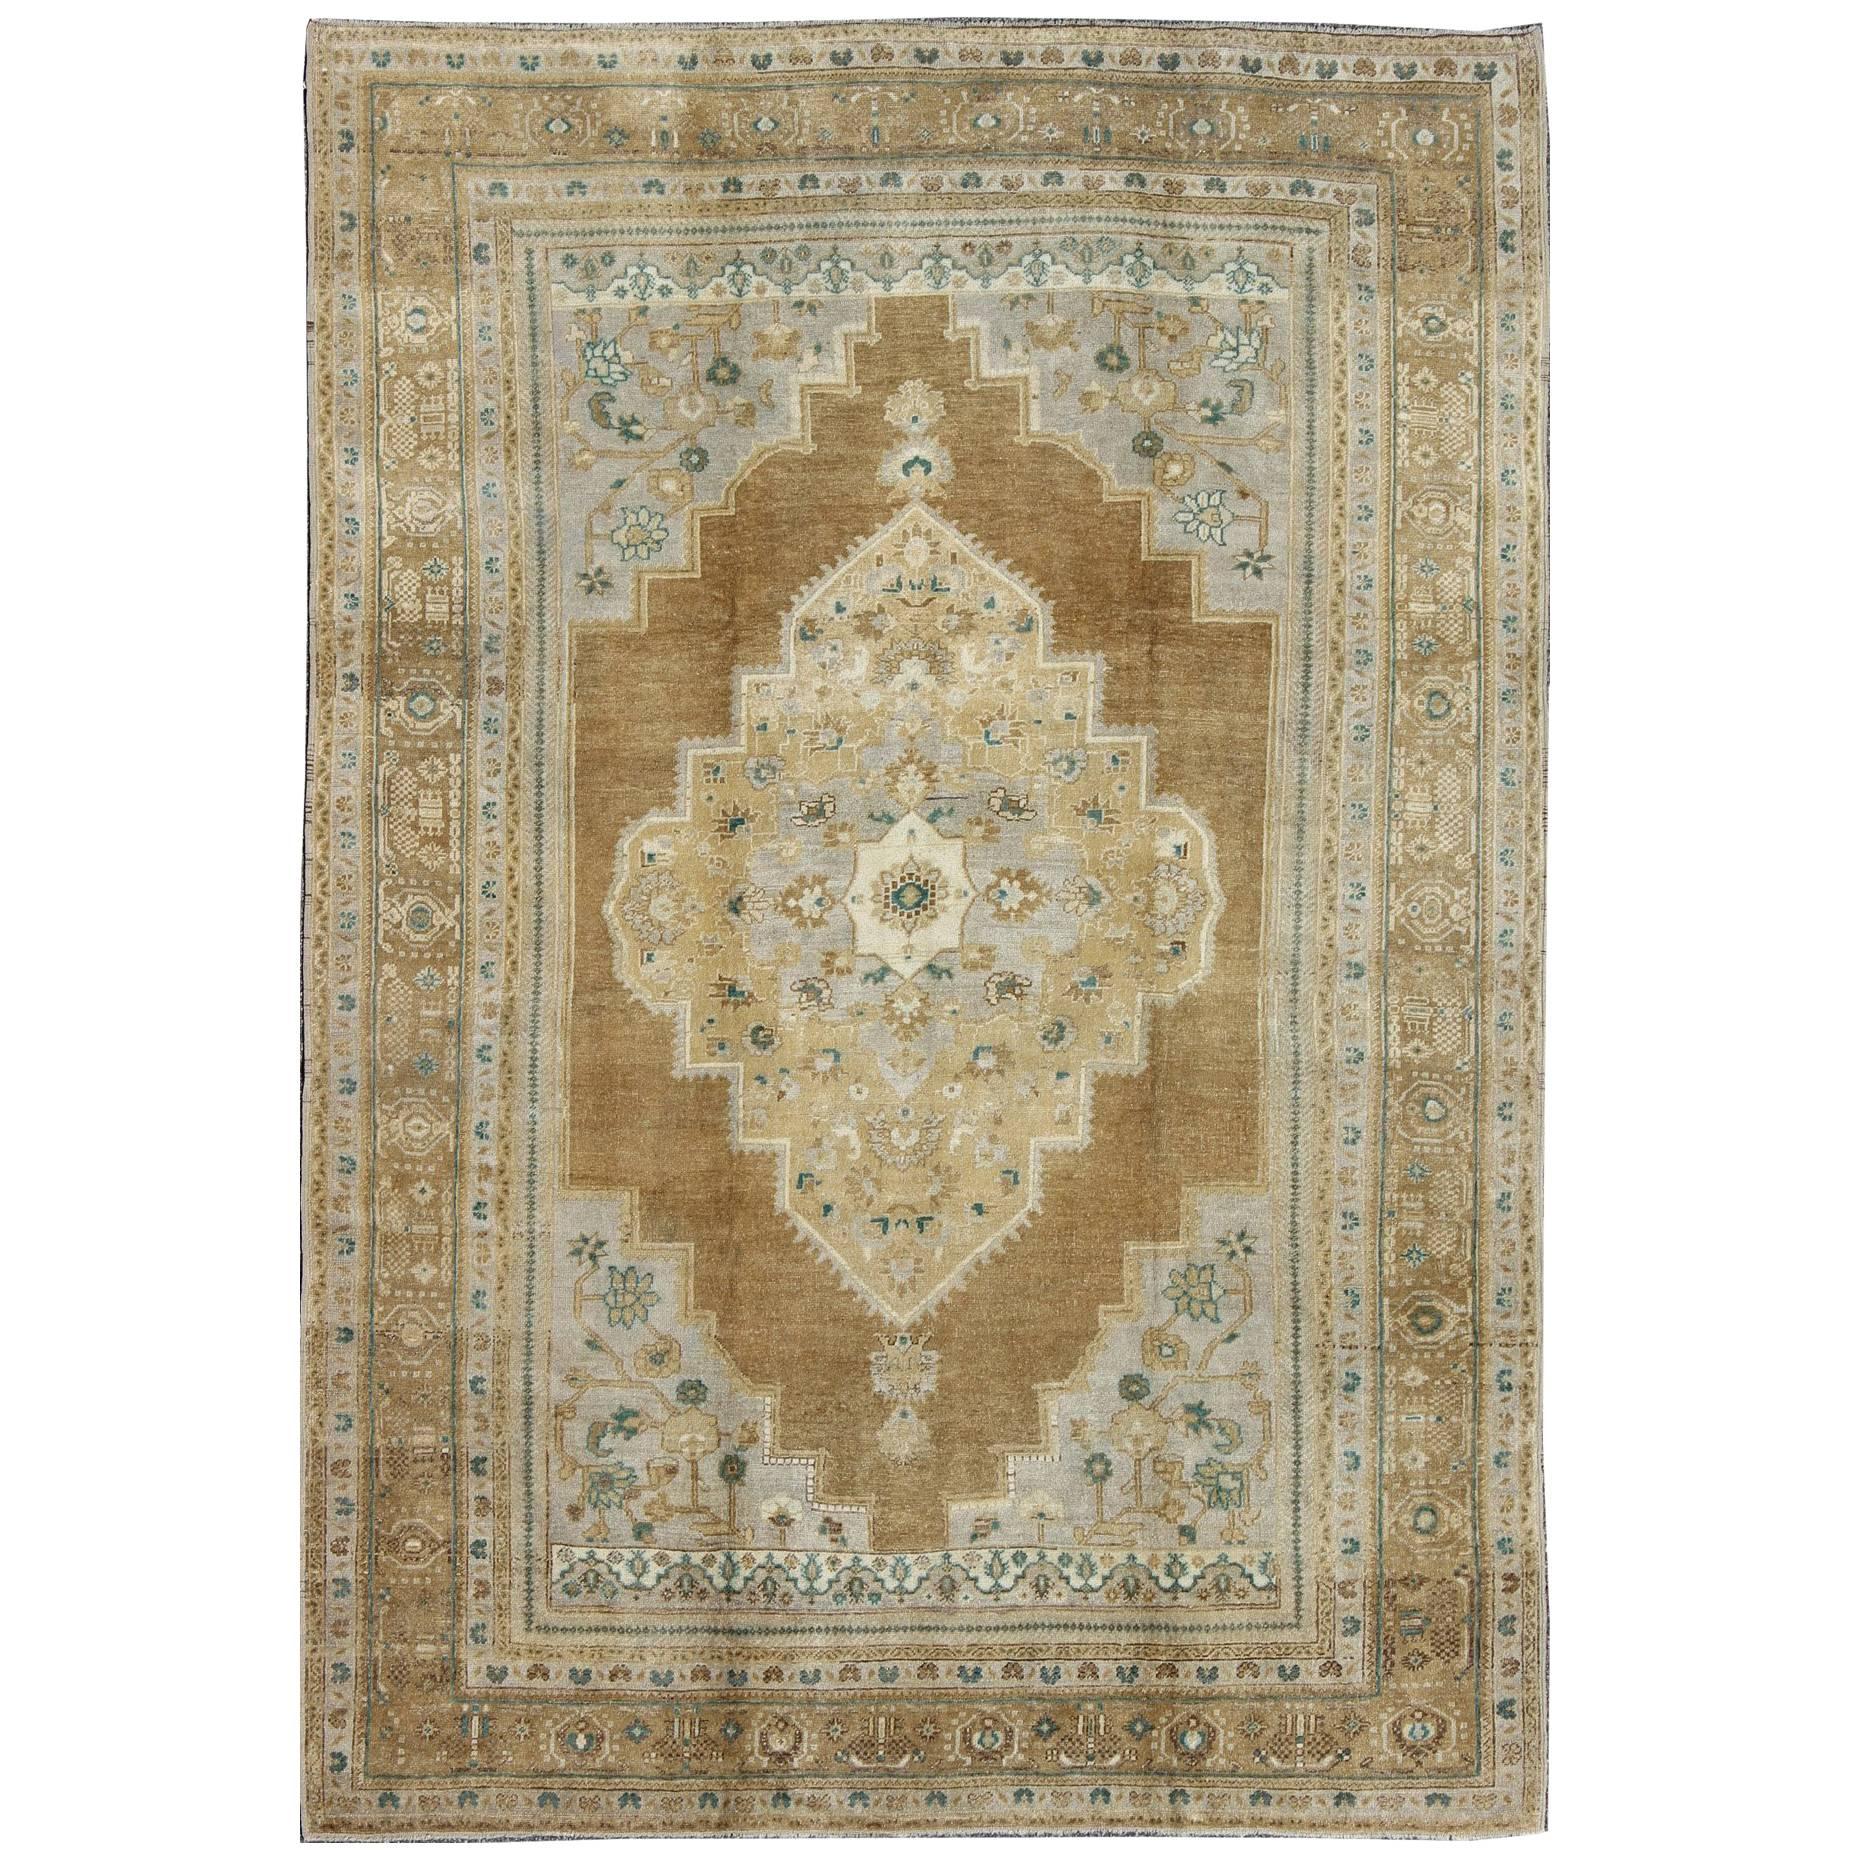 Vintage Oushak Turkish Rug in Light Golden Brown, Gray/Blue and Teal Accents For Sale